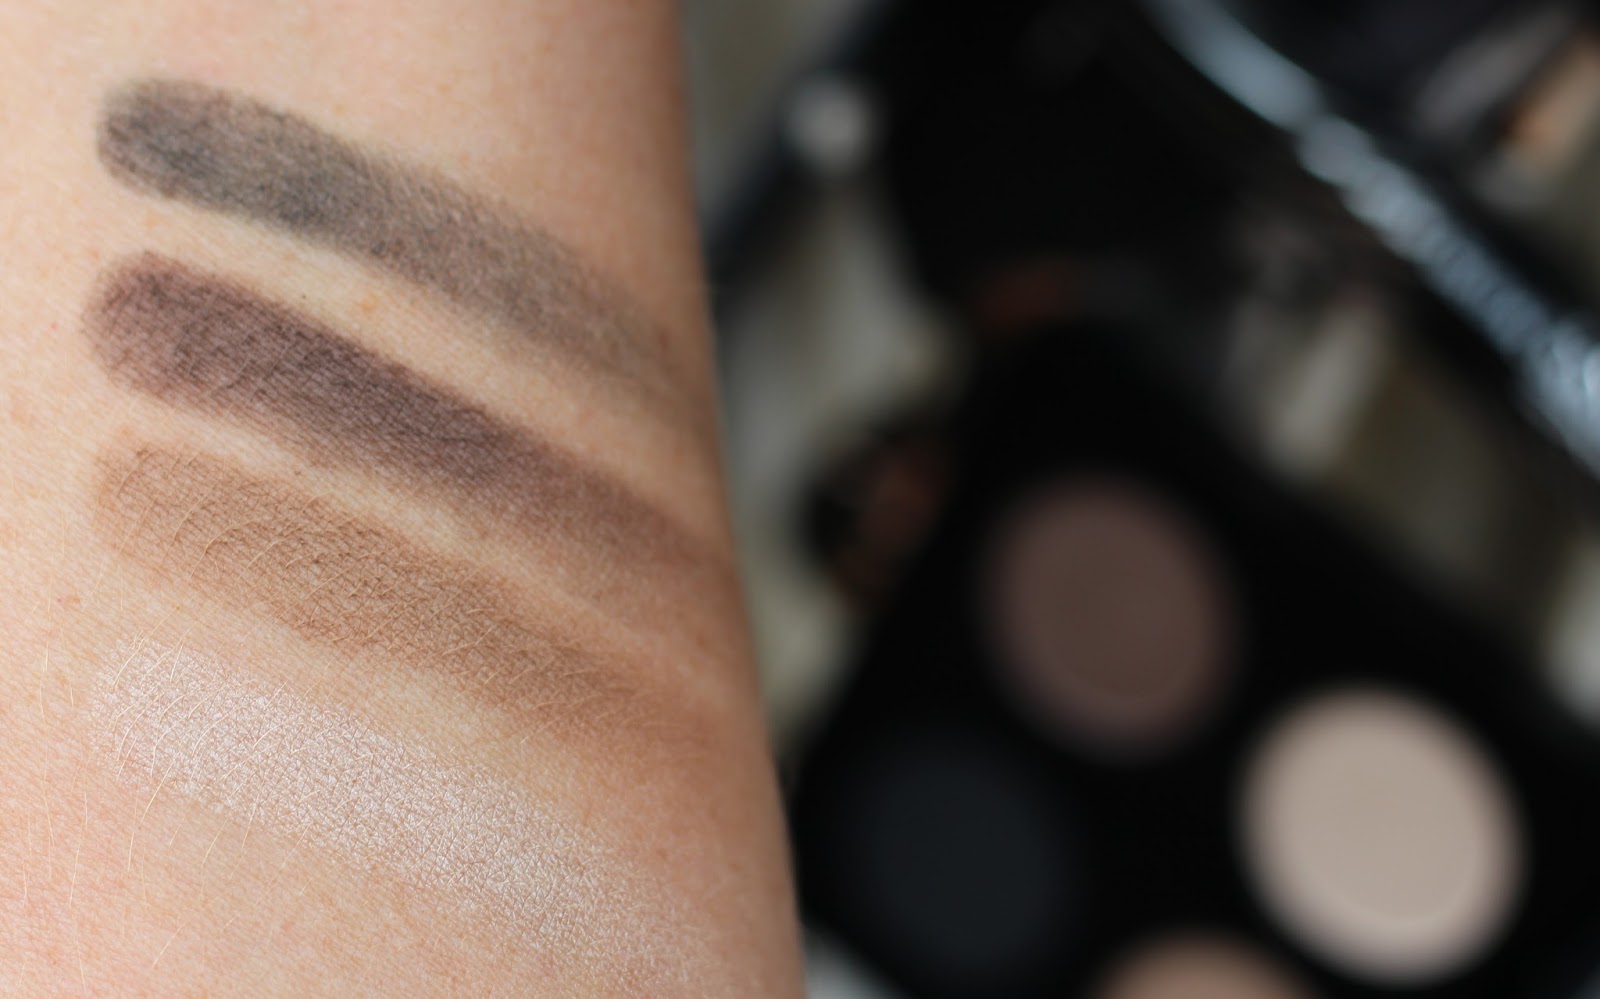 Chanel Clair-Obscur (308) Eyeshadow Quad Review & Swatches